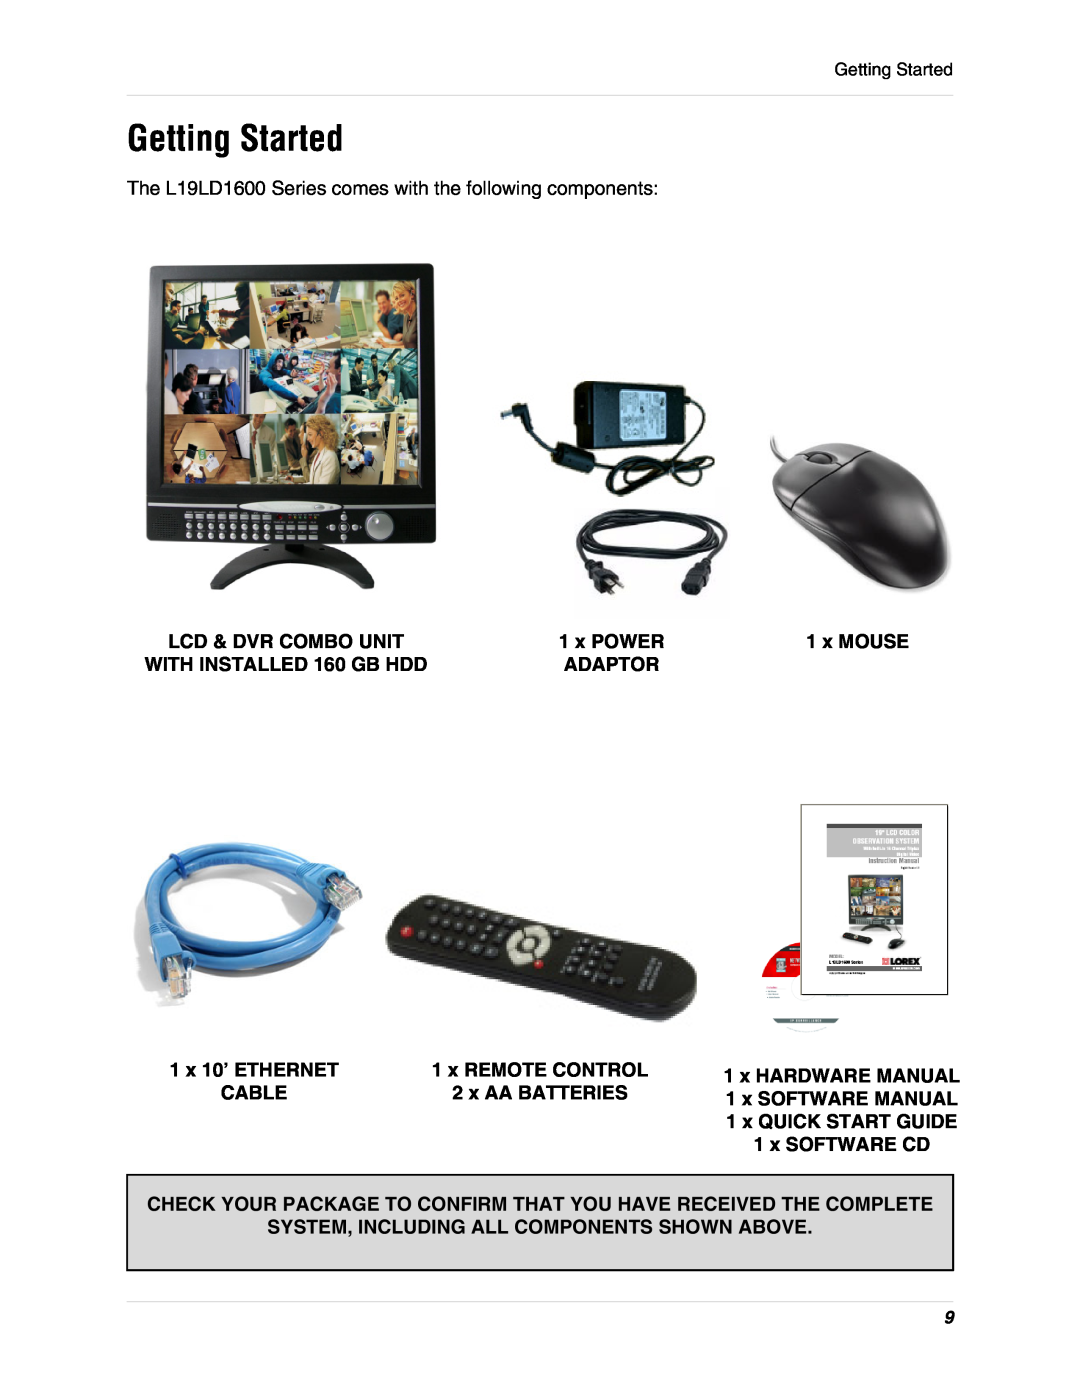 LOREX Technology L19lD1616501 Getting Started, x POWER, Adaptor, x HARDWARE MANUAL, Cable, x AA BATTERIES, x SOFTWARE CD 